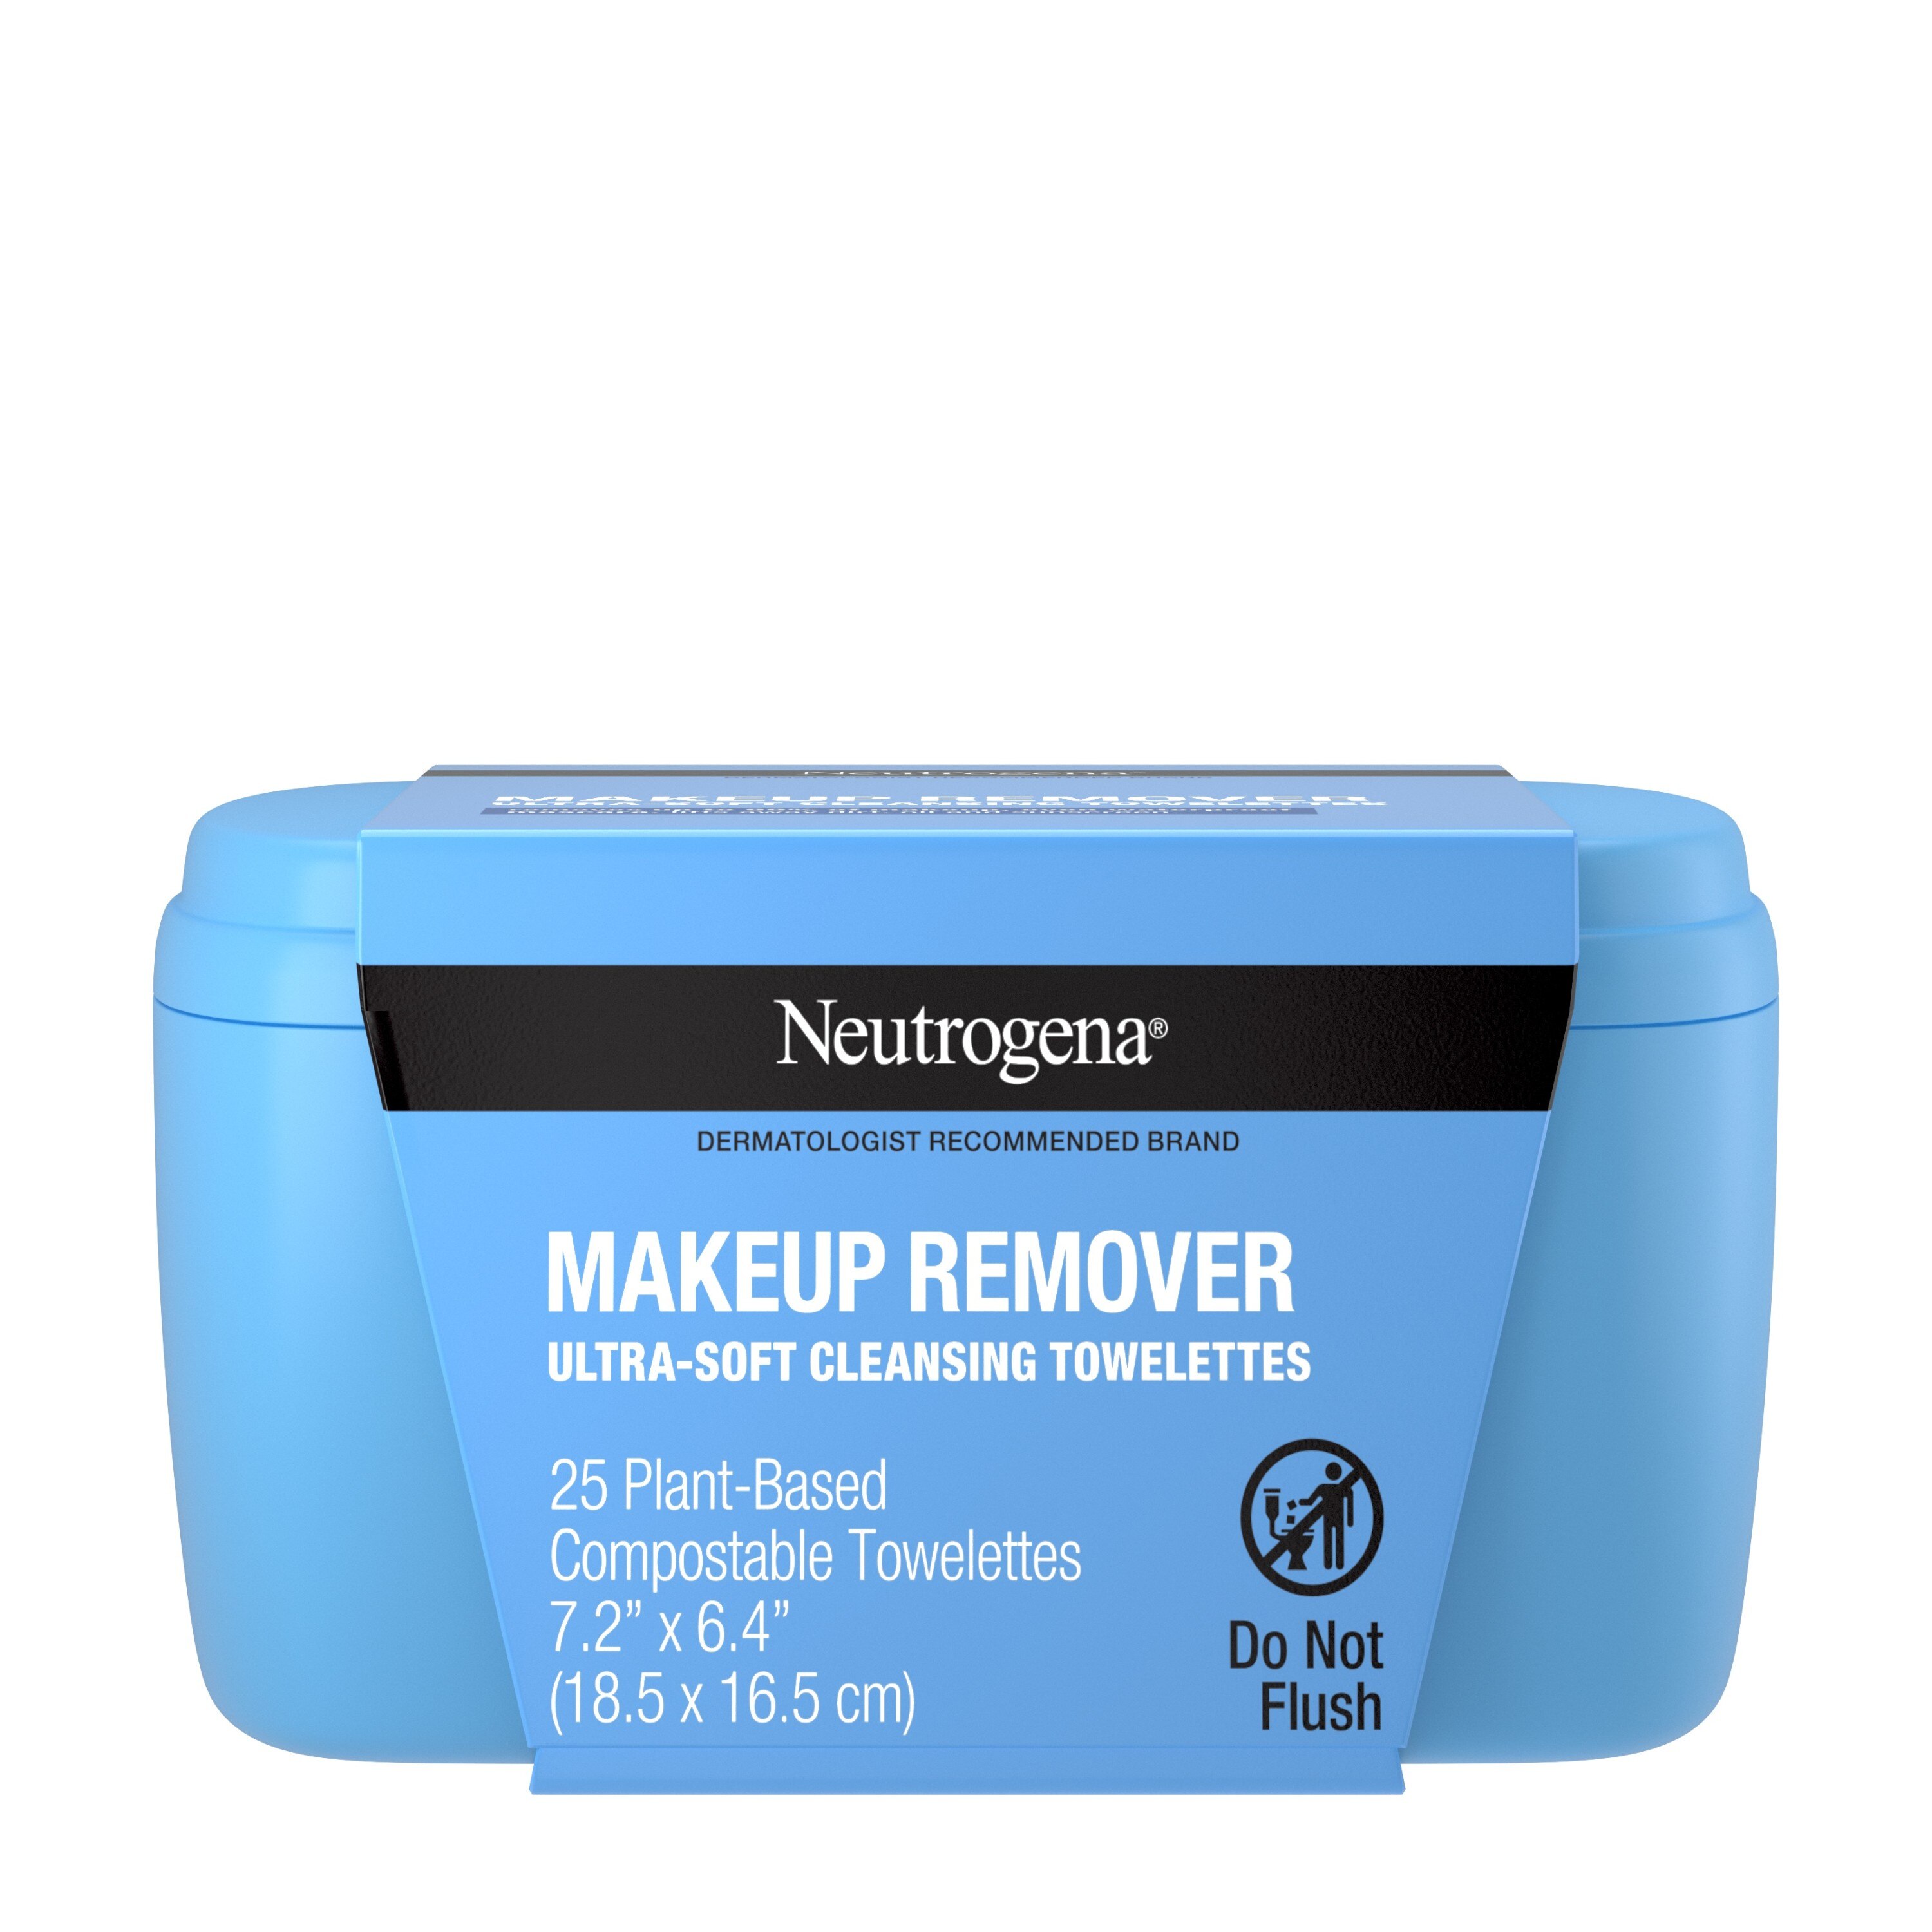 Neutrogena Makeup Remover Cleansing Towelettes & Face Wipes, 25CT